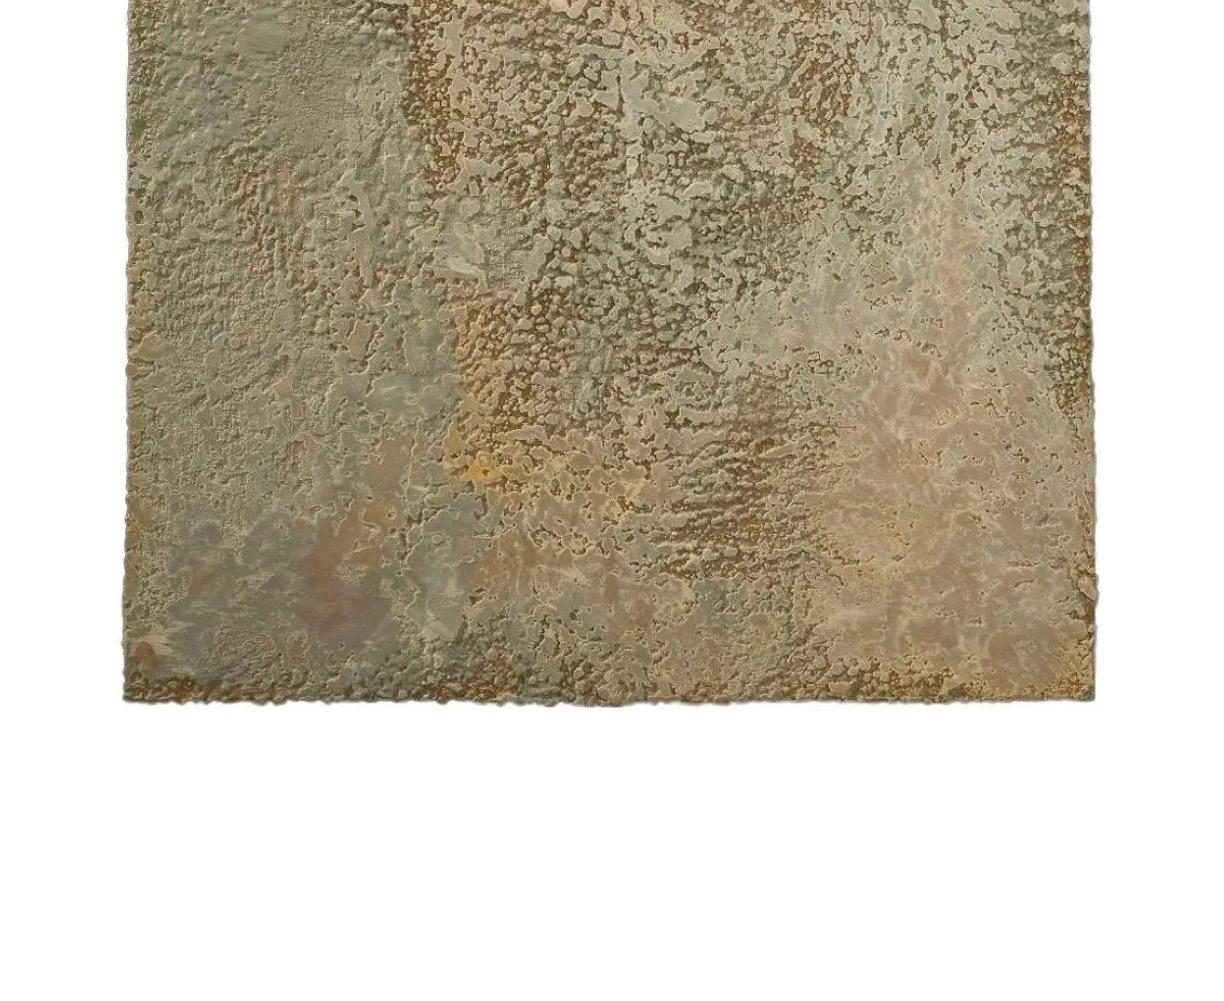 Richard Hirsch Encaustic Painting of Nothing #5B, 2010 In Excellent Condition For Sale In New York, NY